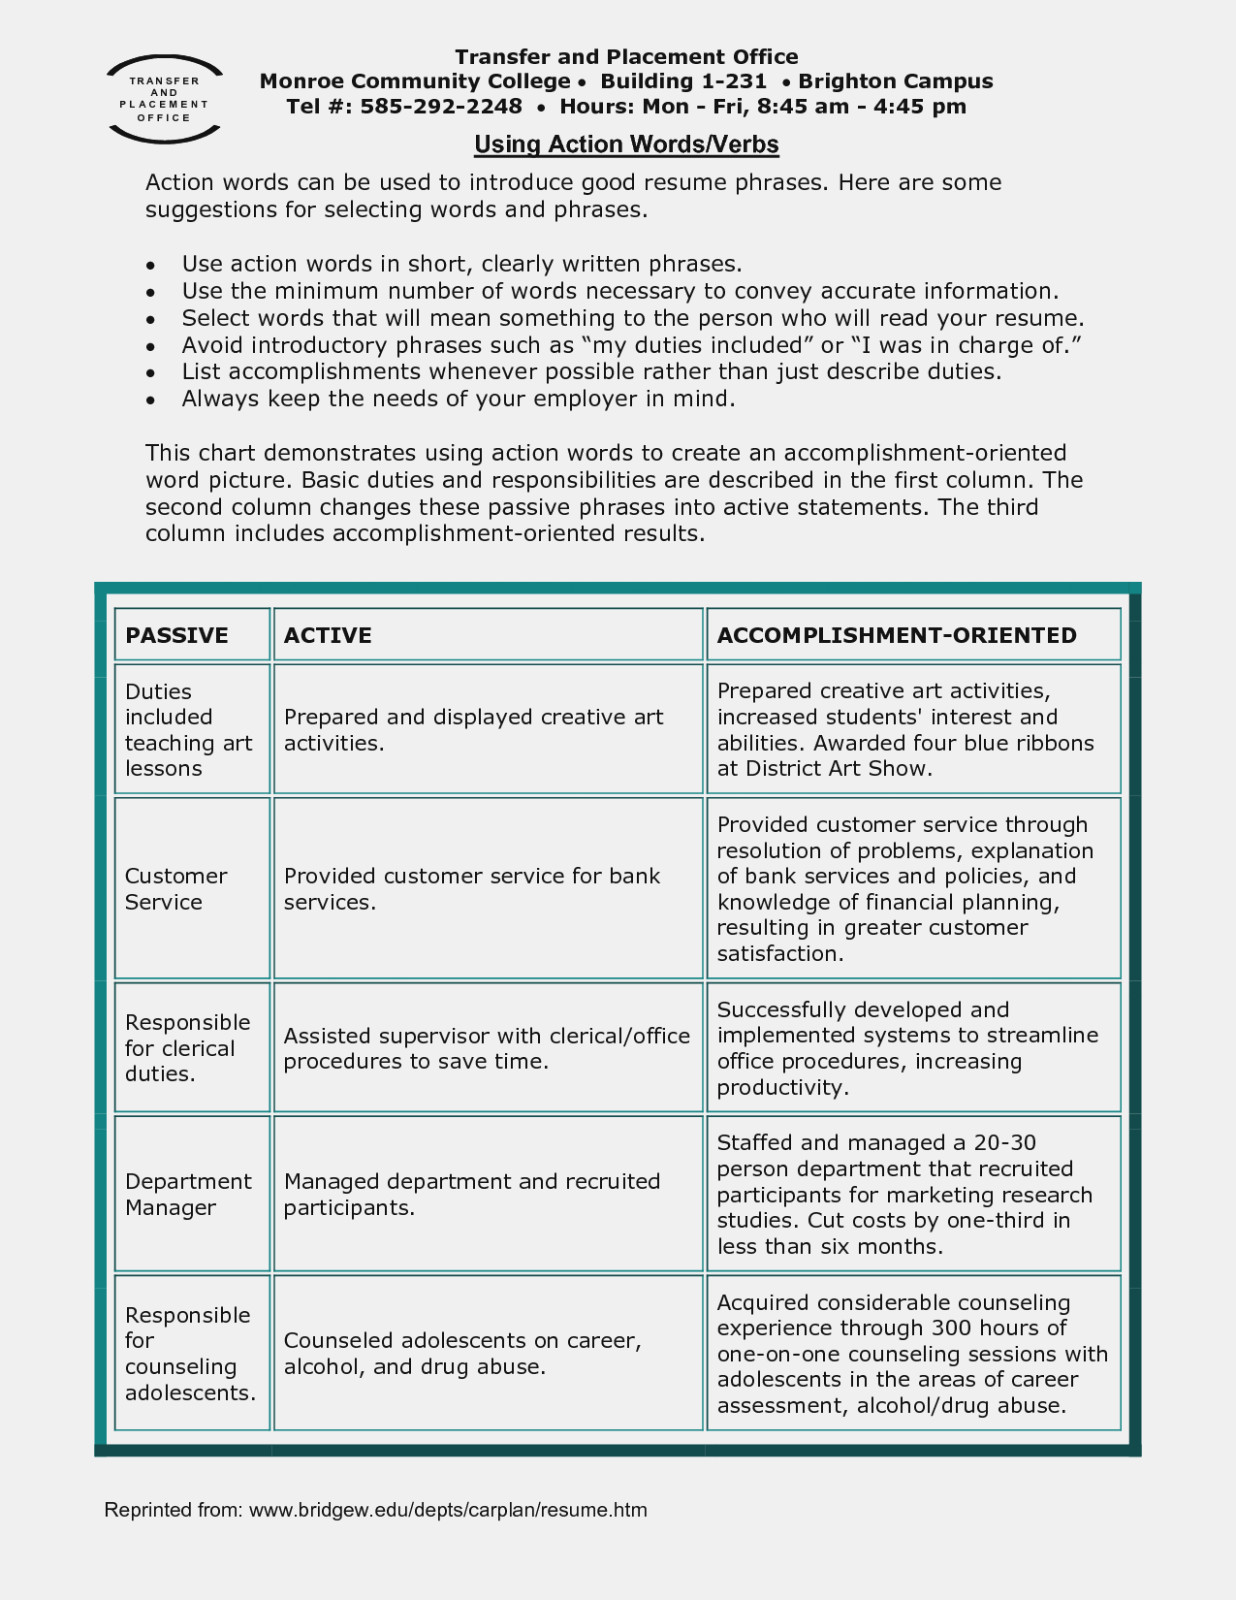 Resume Words To Use Top Words To Use In Resume Is So Famous Resume Information